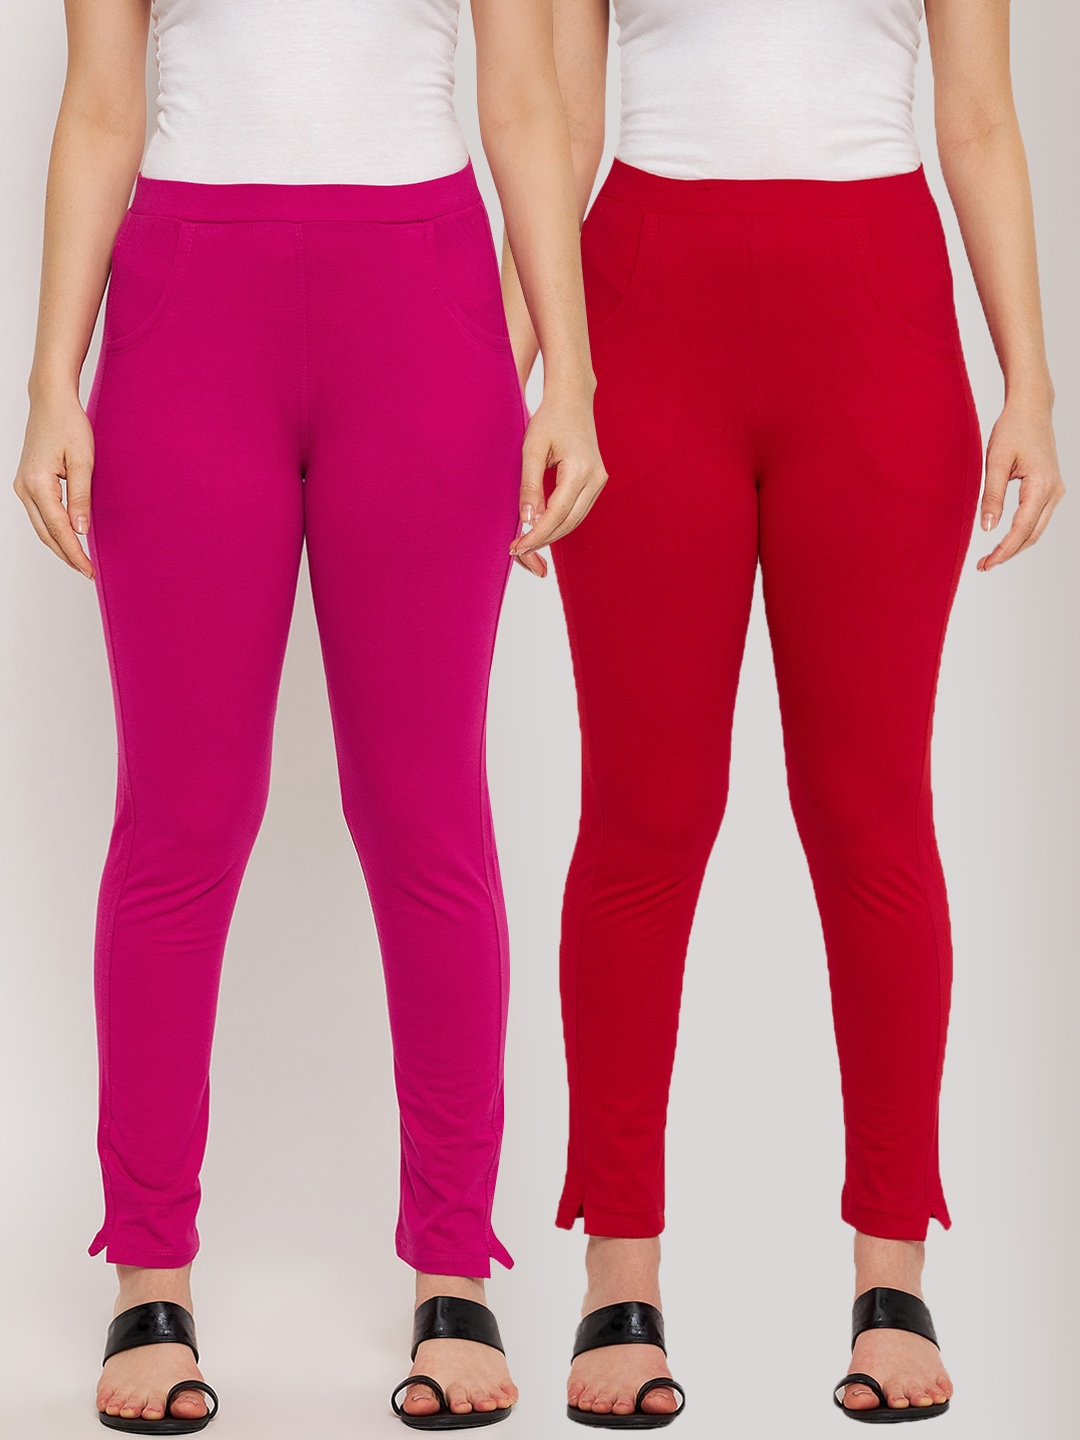 Comfort Lady Women's Cotton Ankle Length Leggings Combo Pack of RED Size  -Free